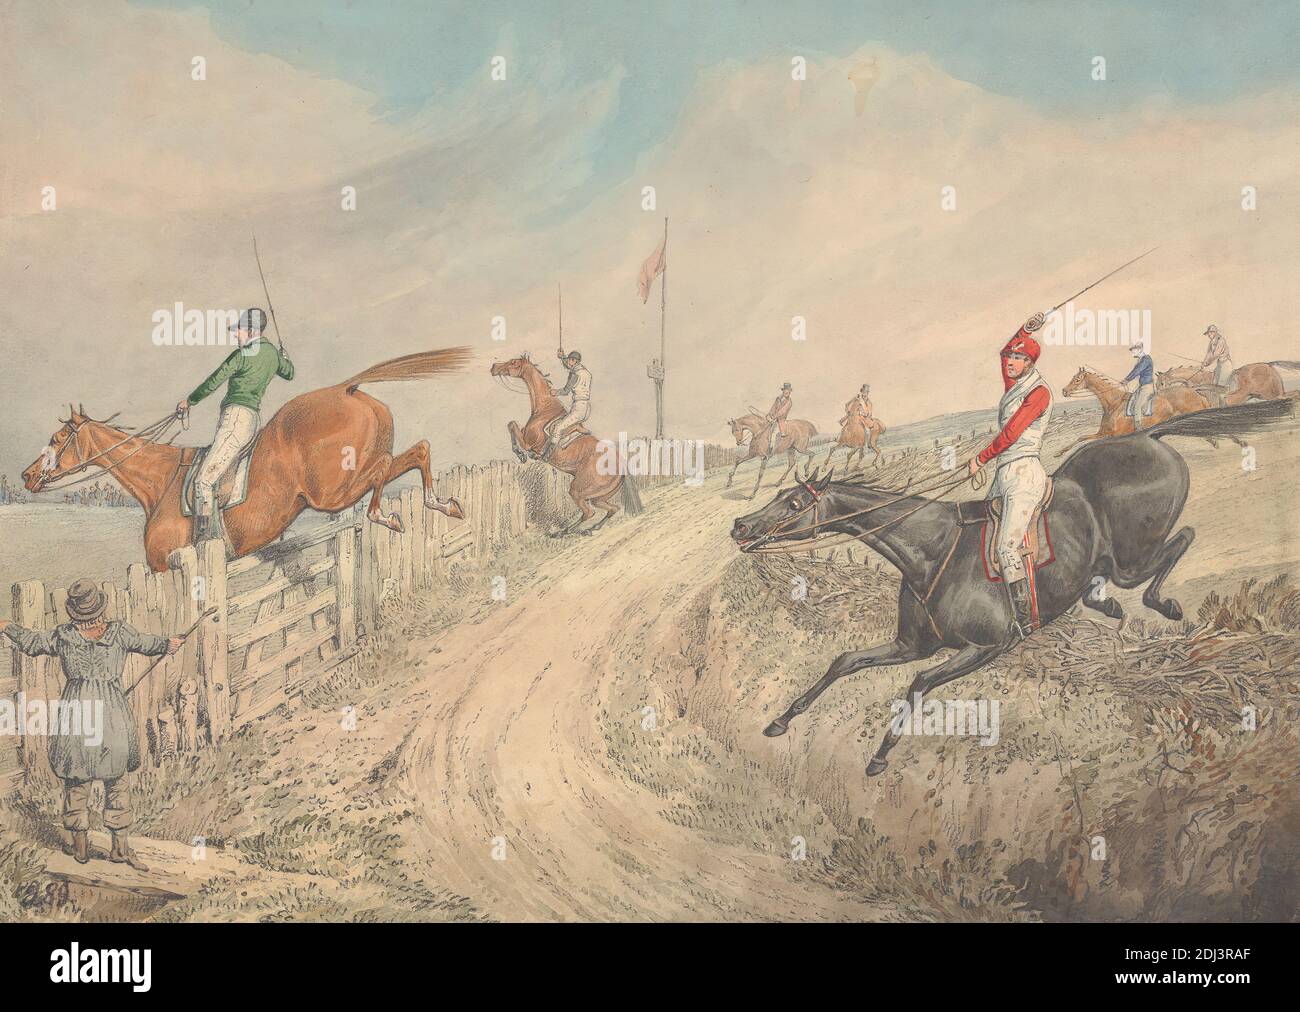 Steeplechasing: The Field Jumping Into and Out of a Lane, Henry Thomas Alken, 1785–1851, British, undated, Graphite and watercolor on moderately thick, moderately textured, beige, wove paper, Sheet: 10 1/4 × 14 3/8 inches (26 × 36.5 cm), fence, flag, horse racing, horseback riders, horseback riding, horses (animals), jockeys, jumping, lane (road), men, race (event), road, sporting art Stock Photo